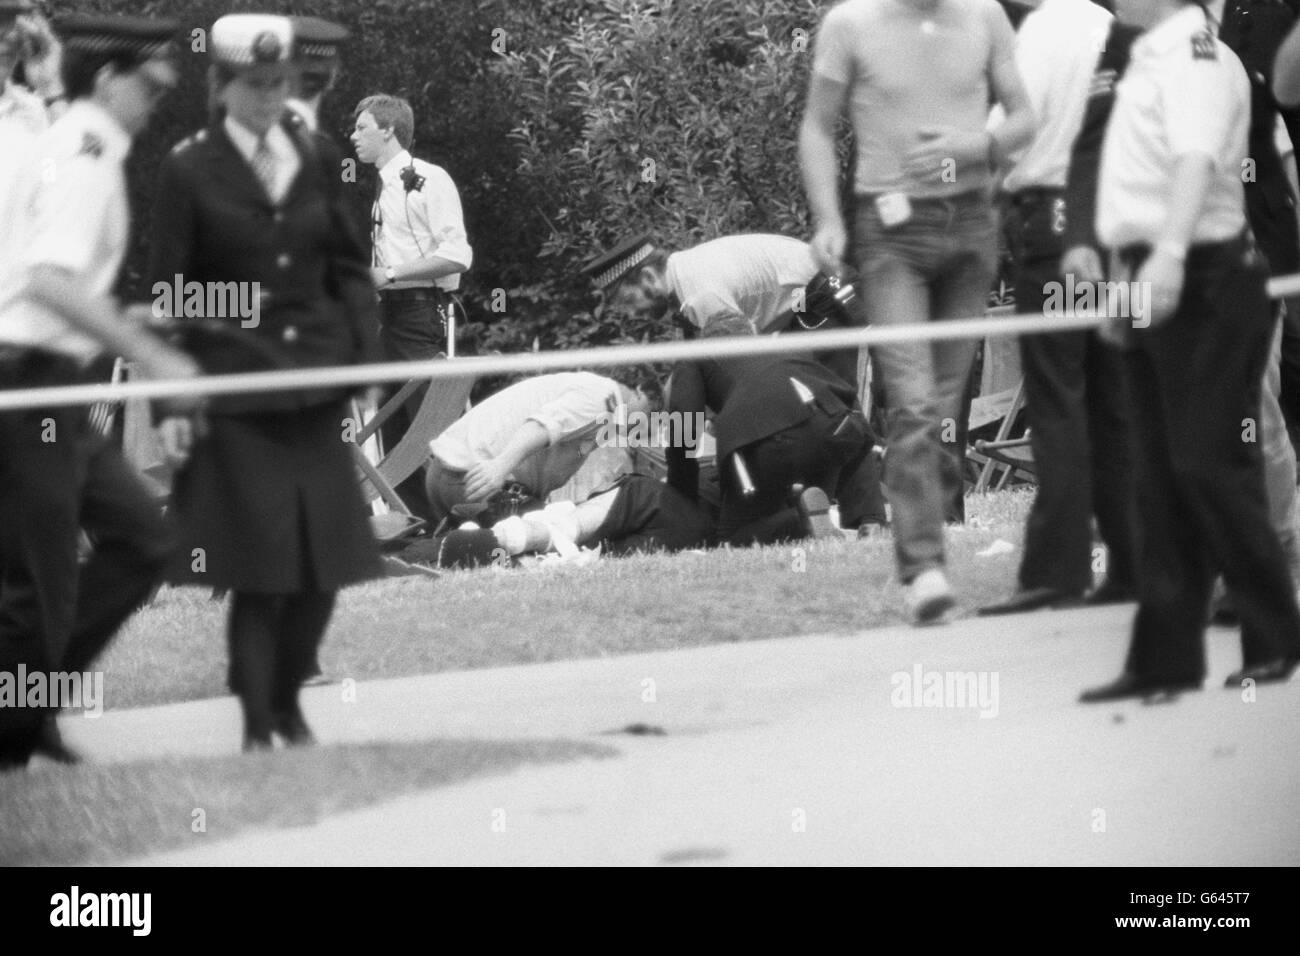 Politics - IRA Hyde Park and Regent's Park Bombings - Emergency services tend to a casualty - London Stock Photo